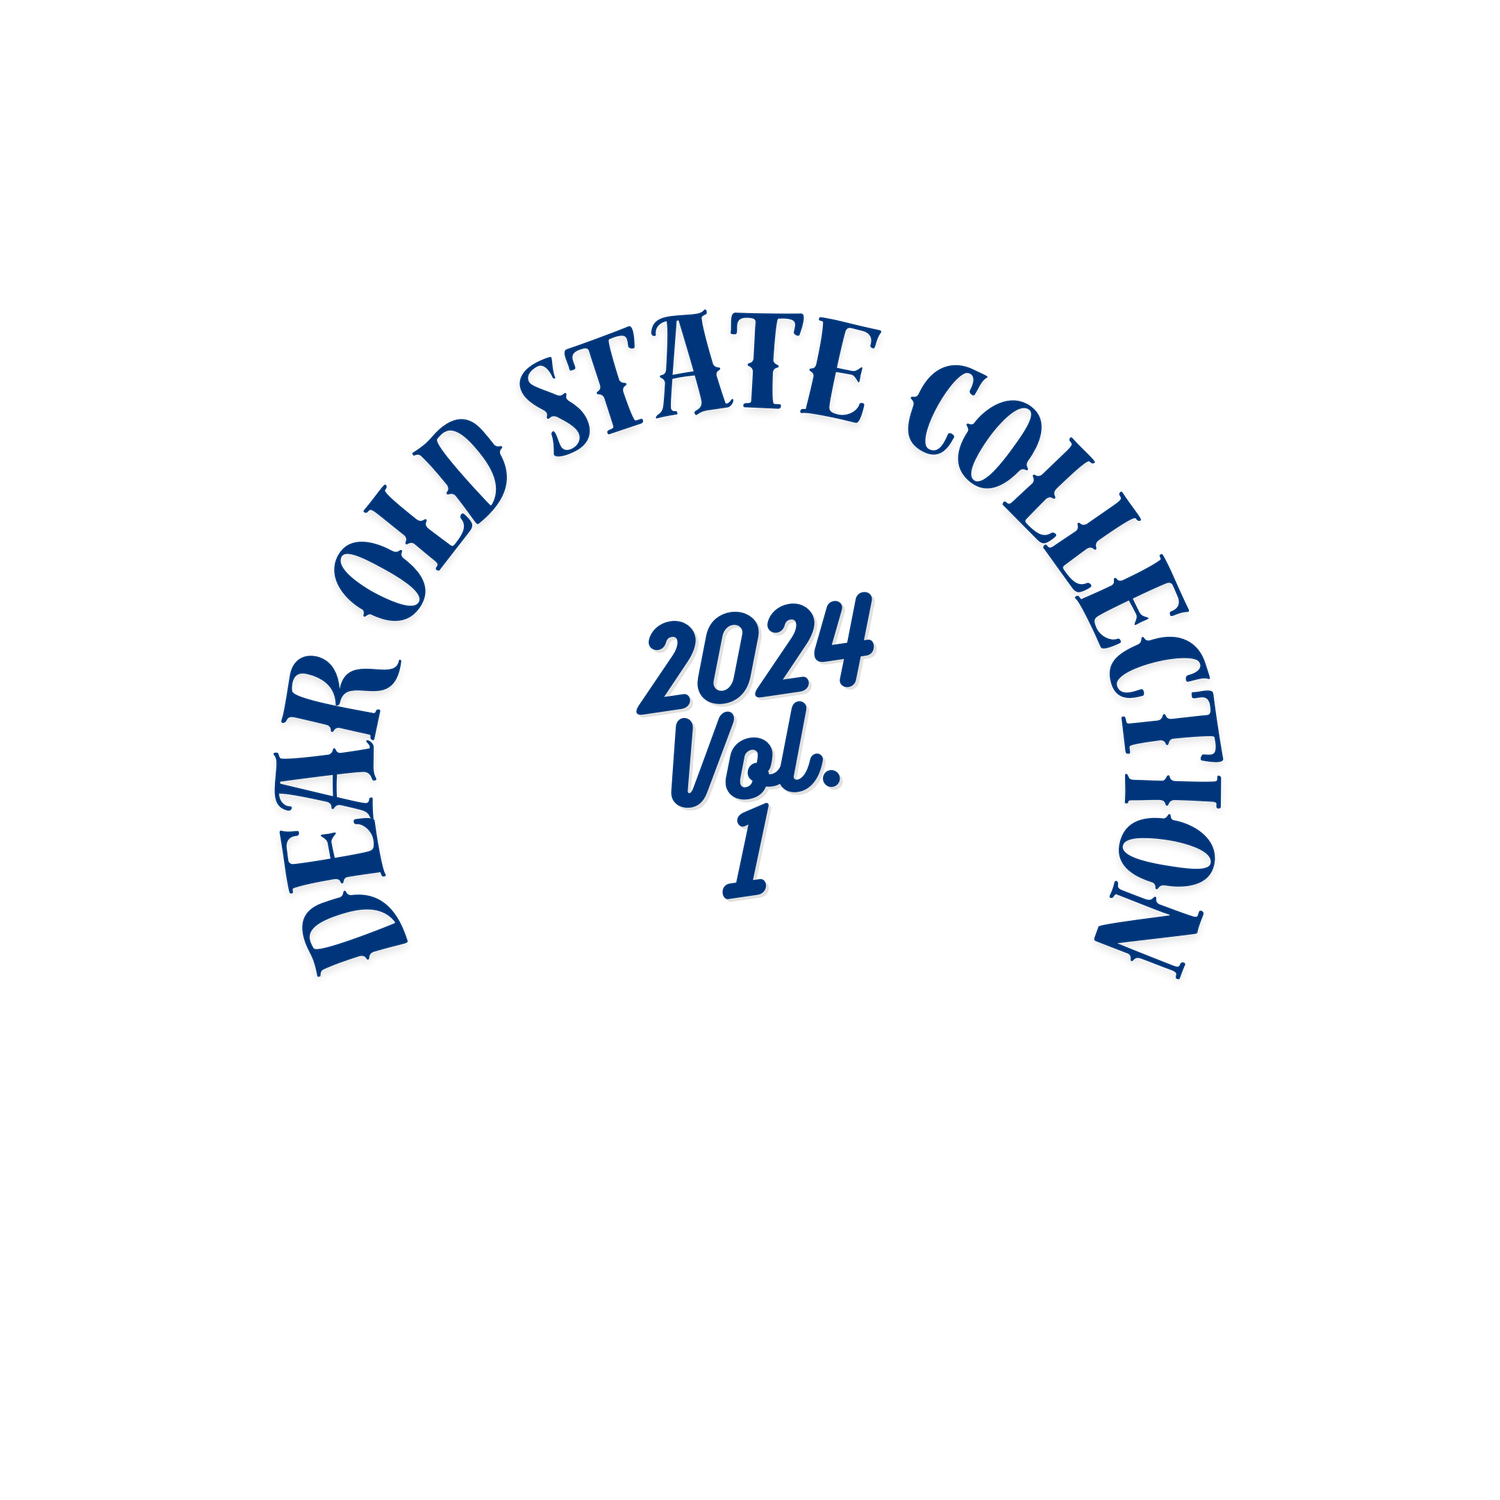 Dear Old State Collection